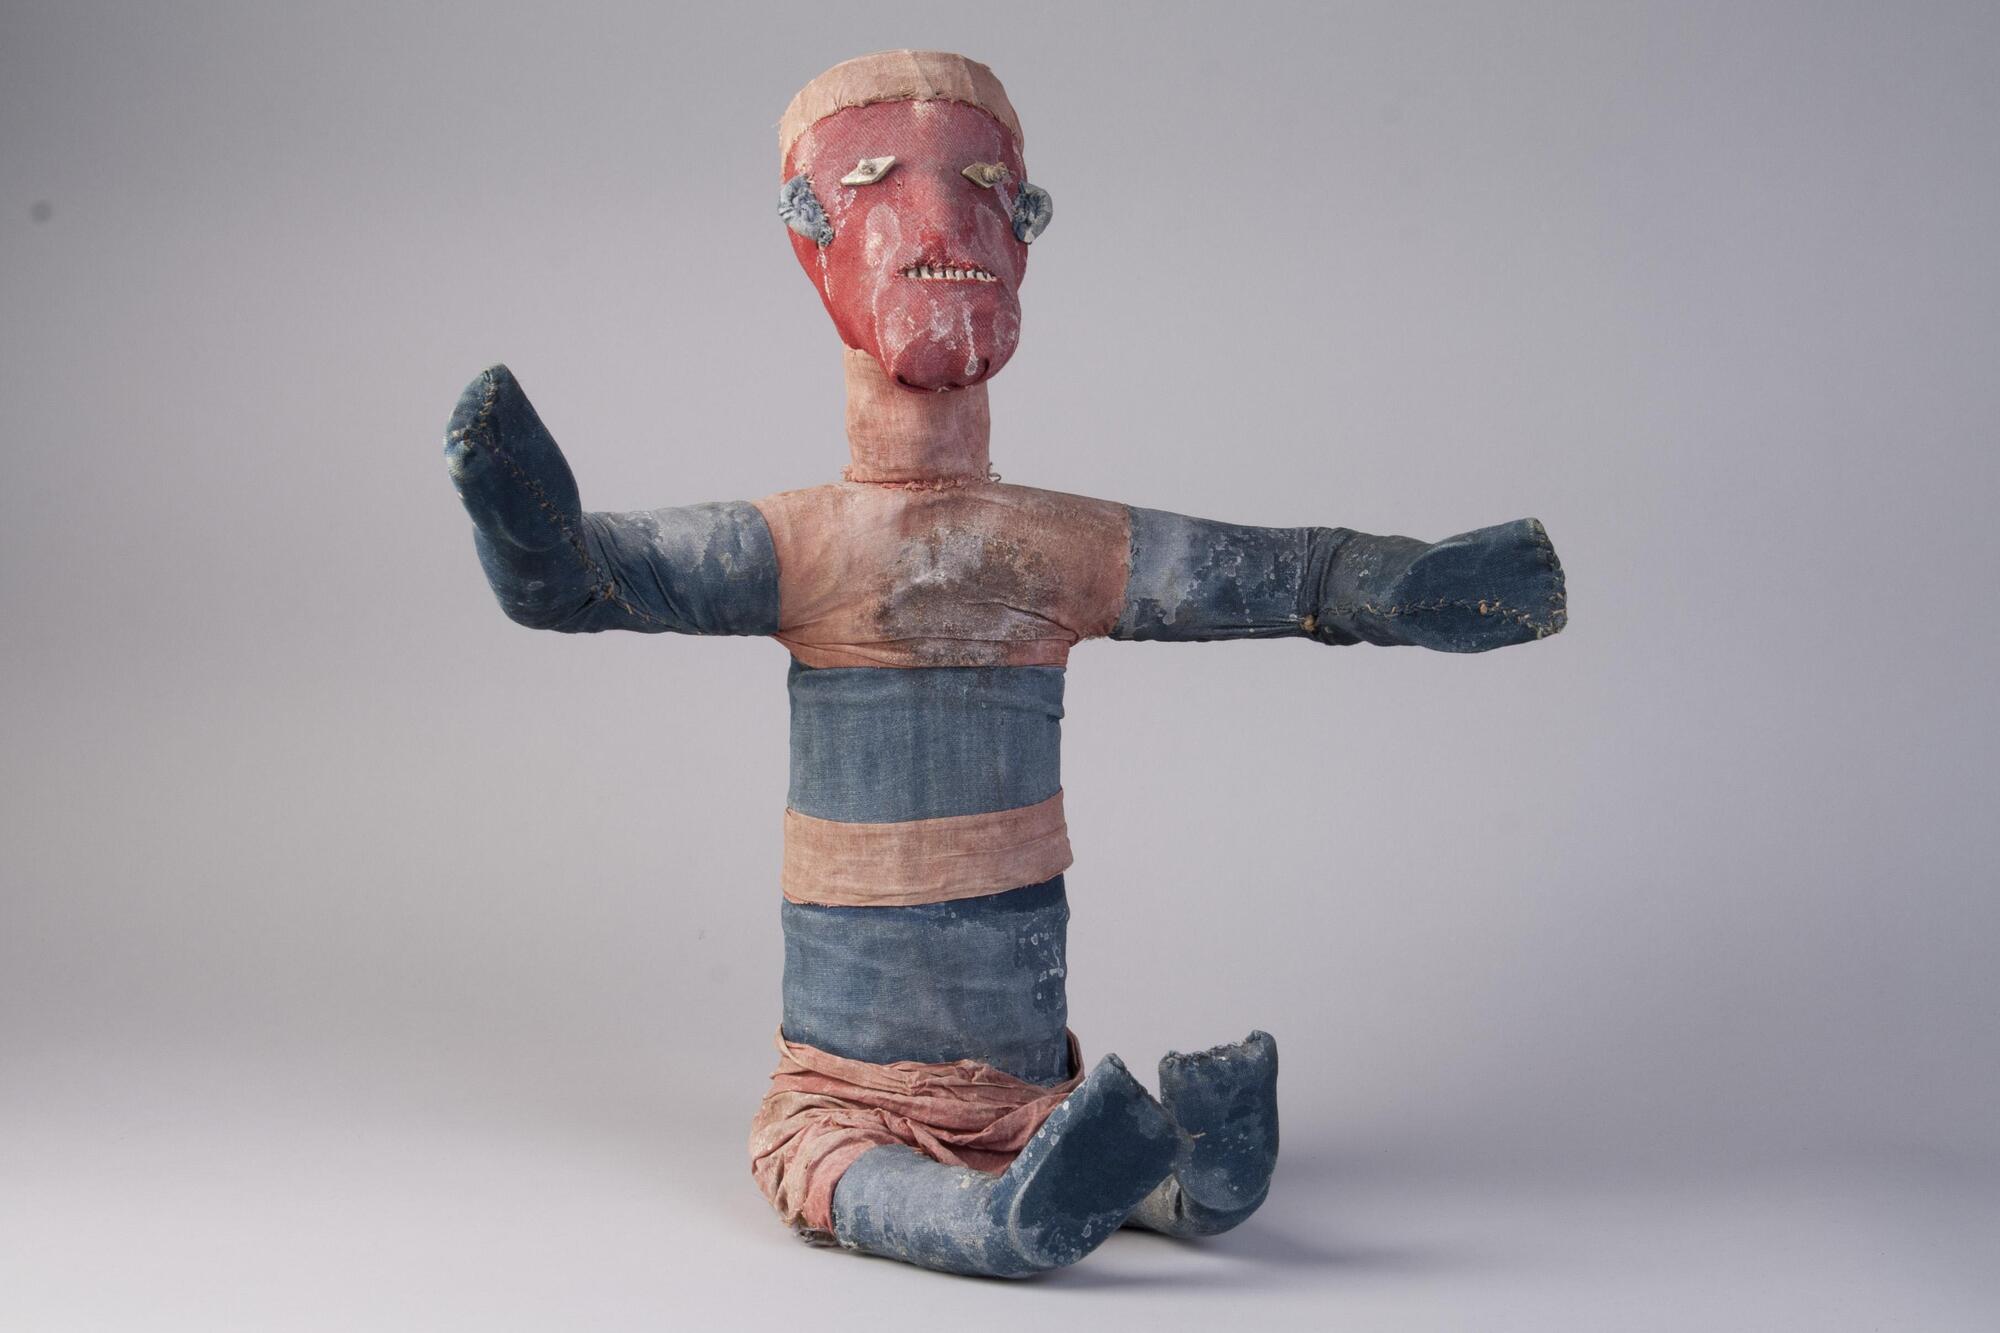 Cloth figure of a human, bound around human remains. The figure is in a seated position with arms outstretched. The torso and neck are cylindrical and elongated.